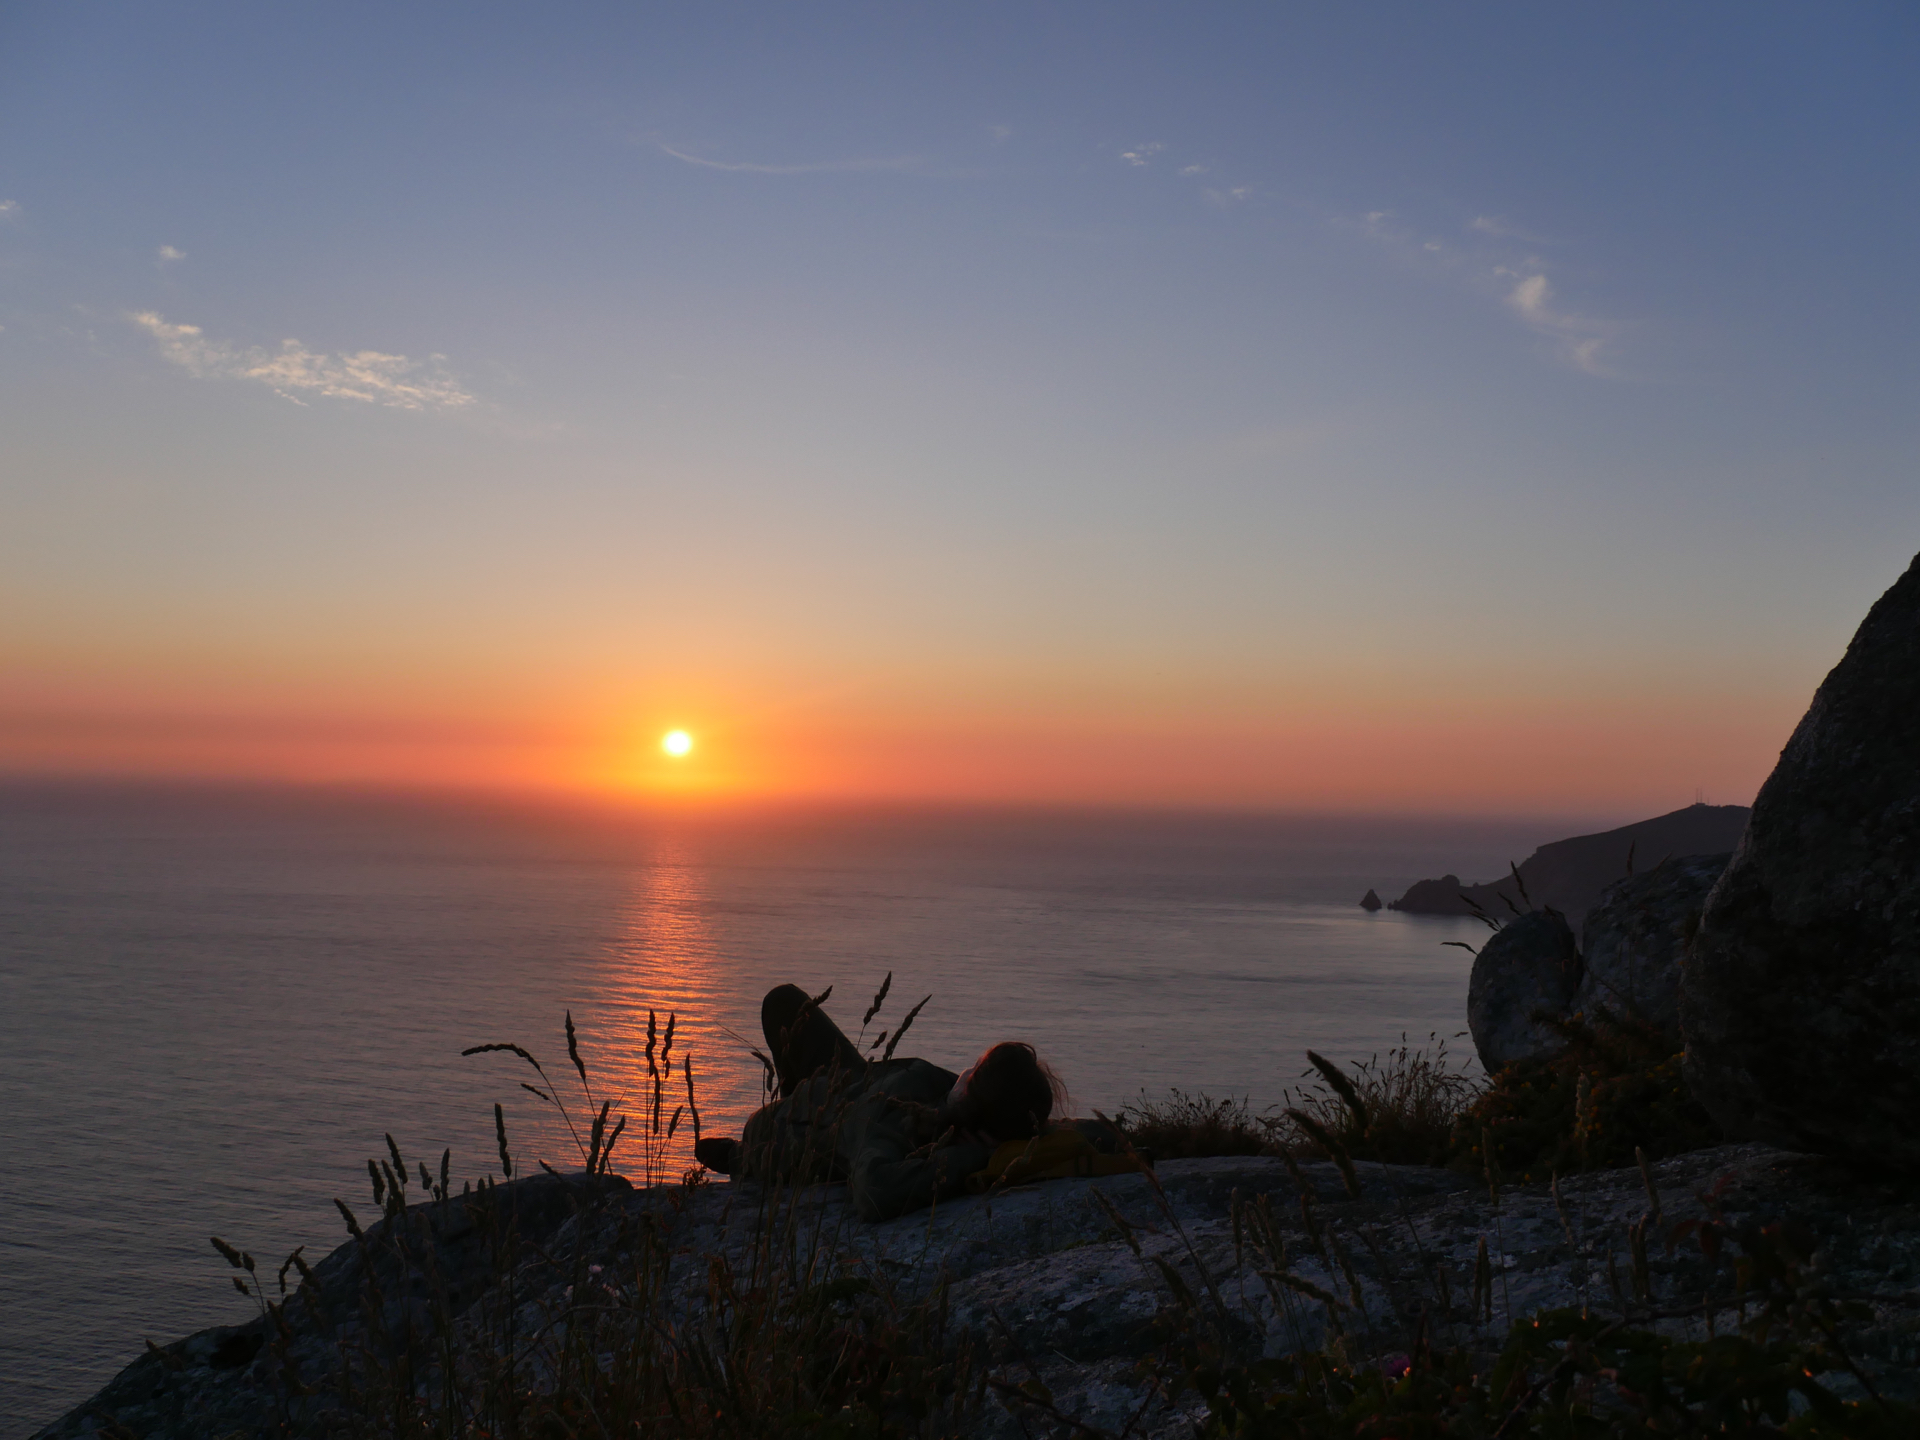 A Camino pilgrim lays on a rock looking at the sunset over the Finisterre peninsula.